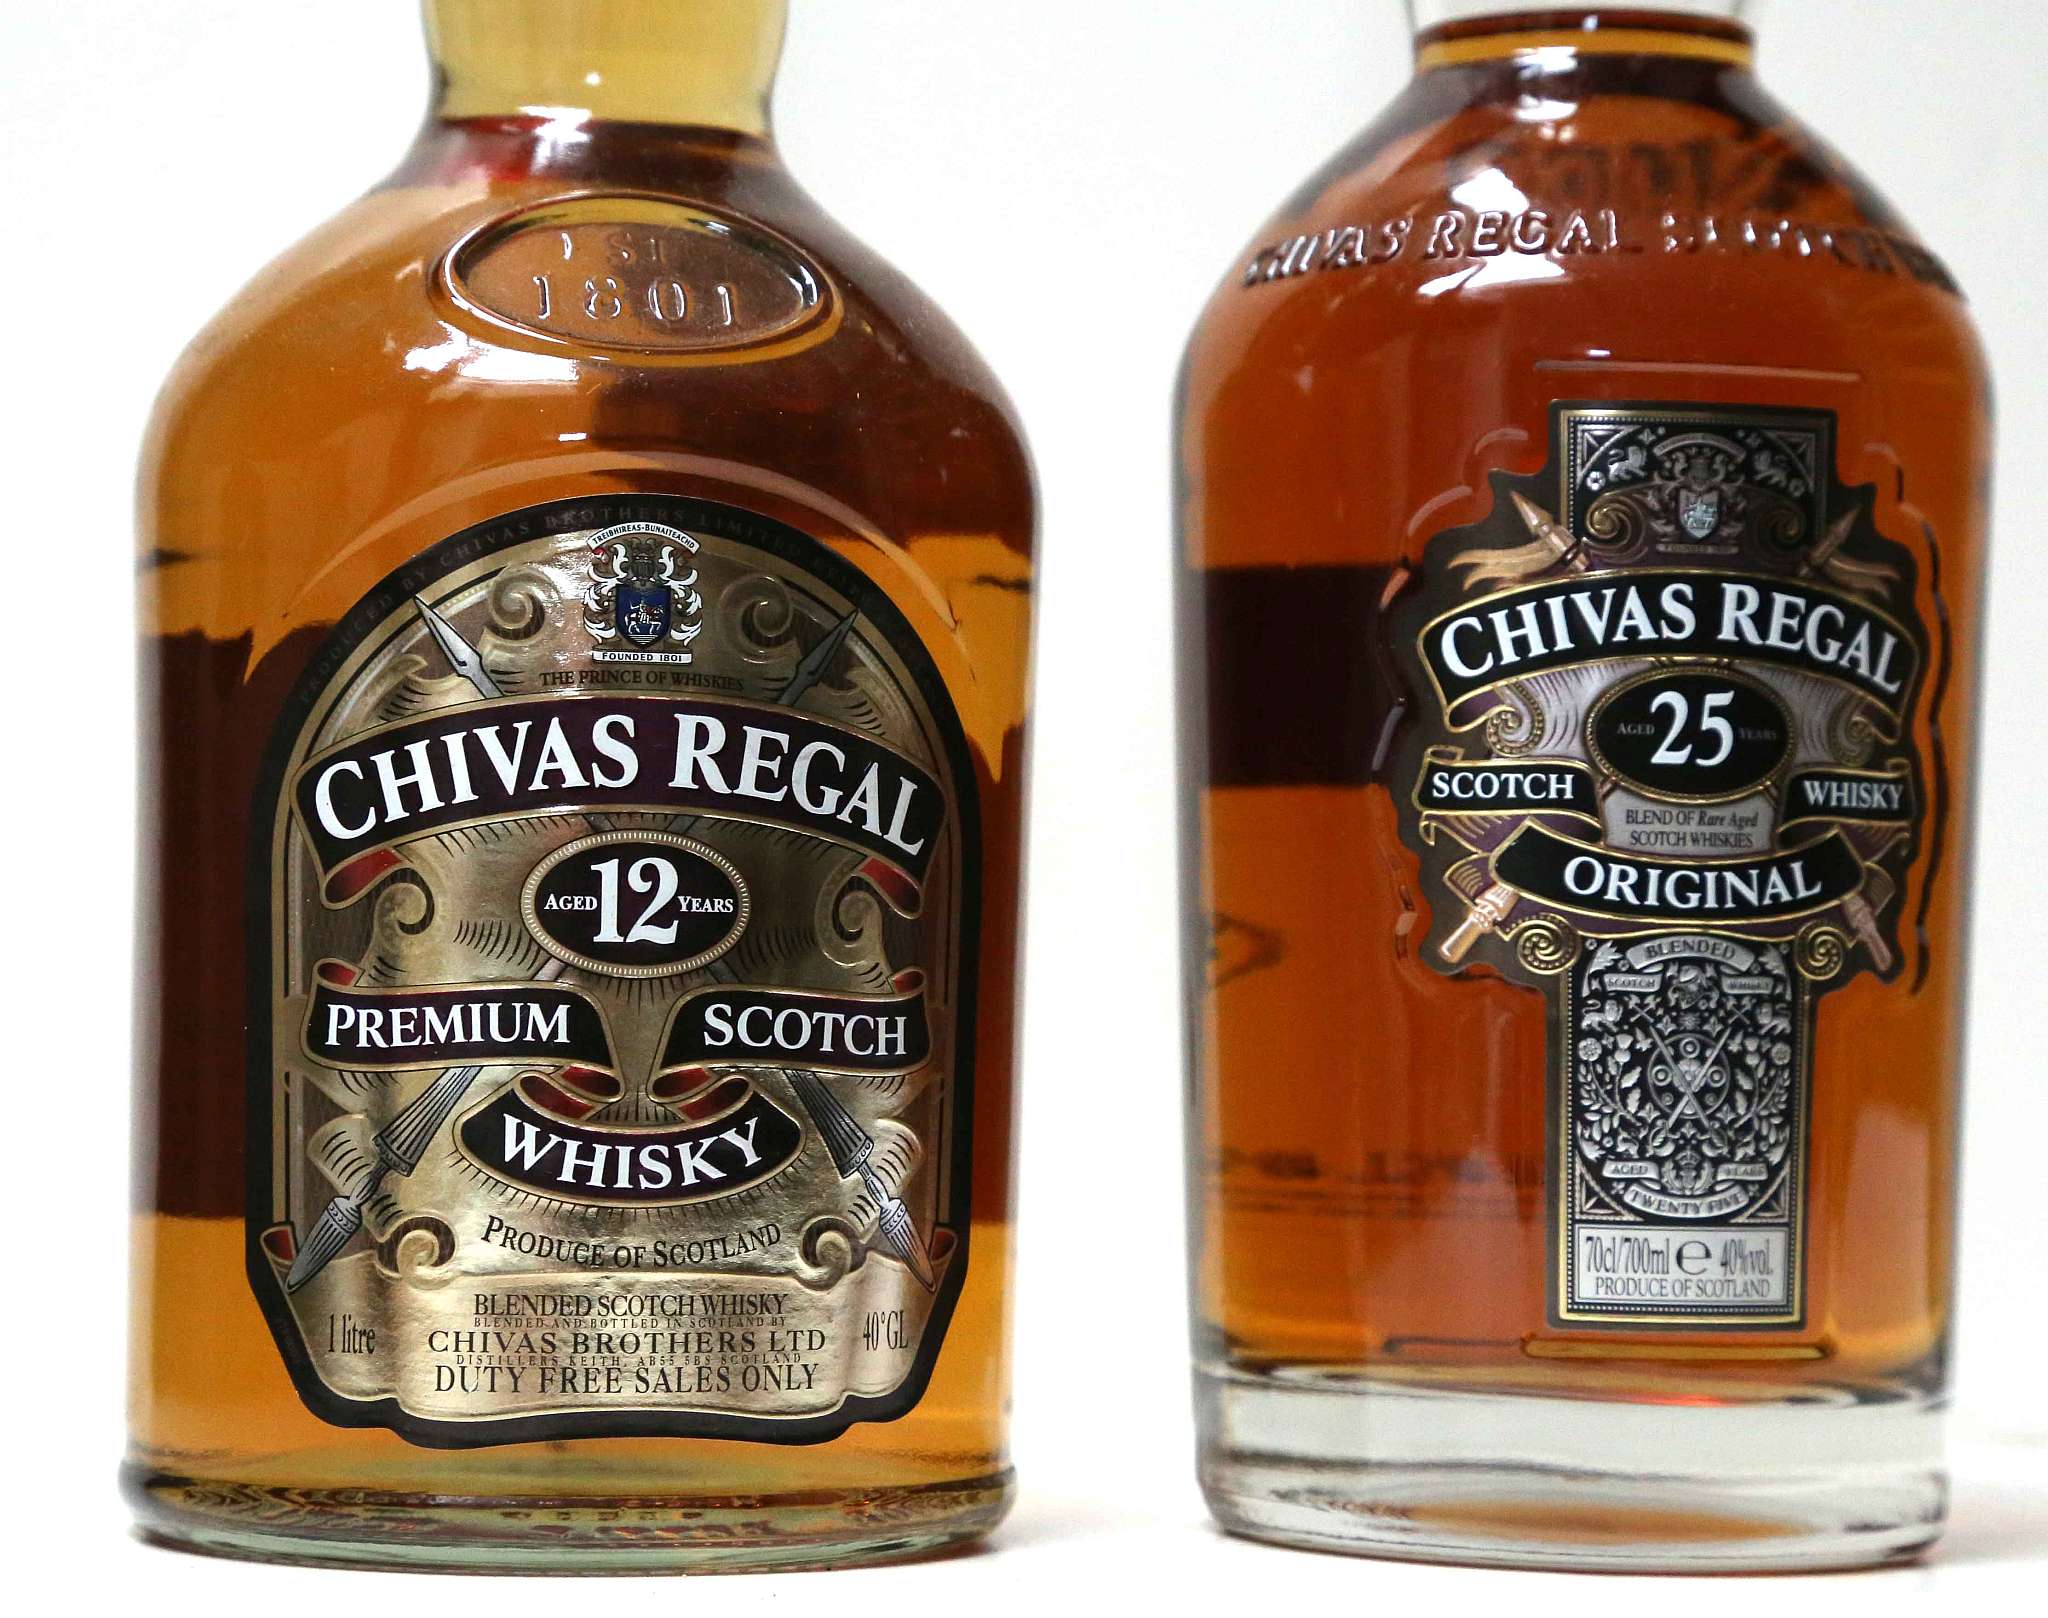 Chivas Regal 12 year old, Chivas Regal 25 year old - Image 4 of 7